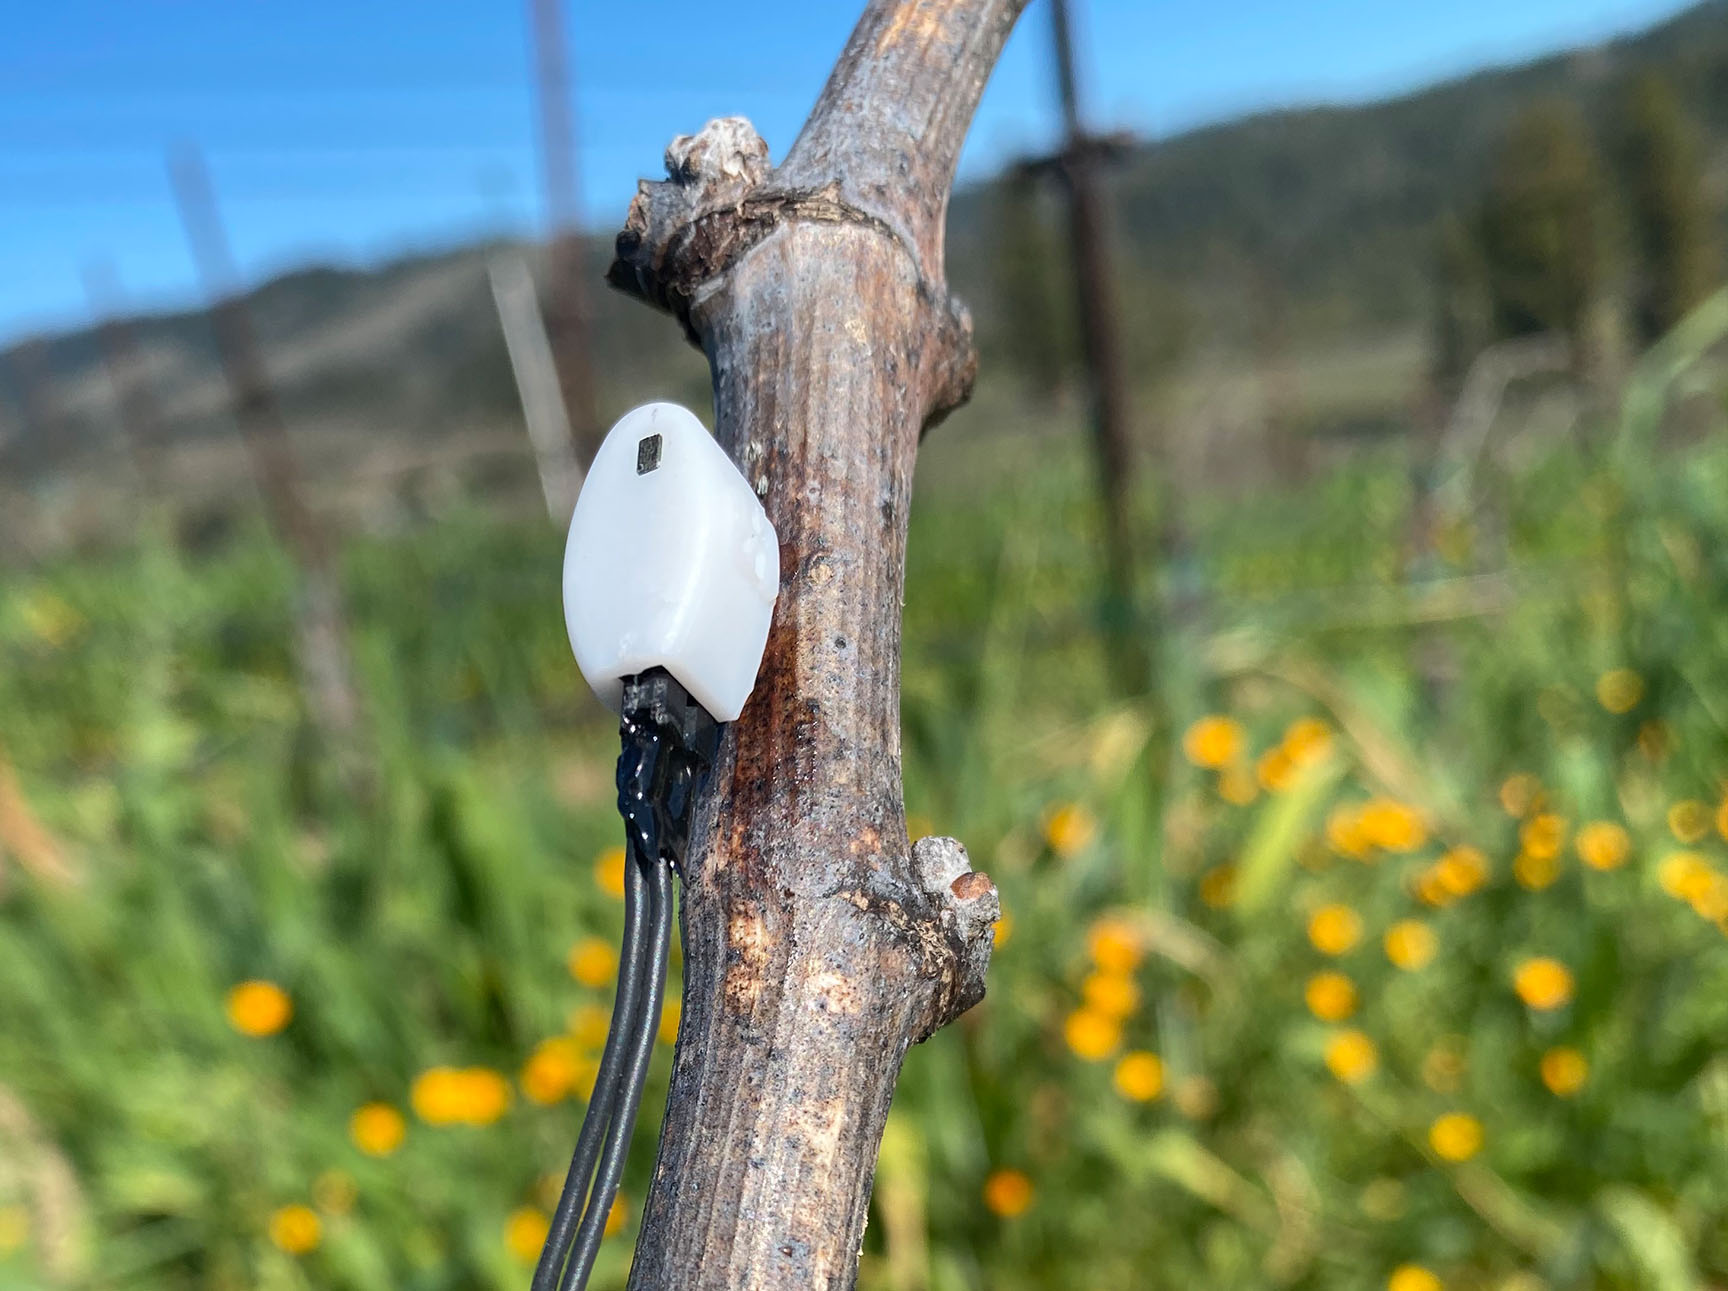 A sap flow probe installed on the grapevine branch